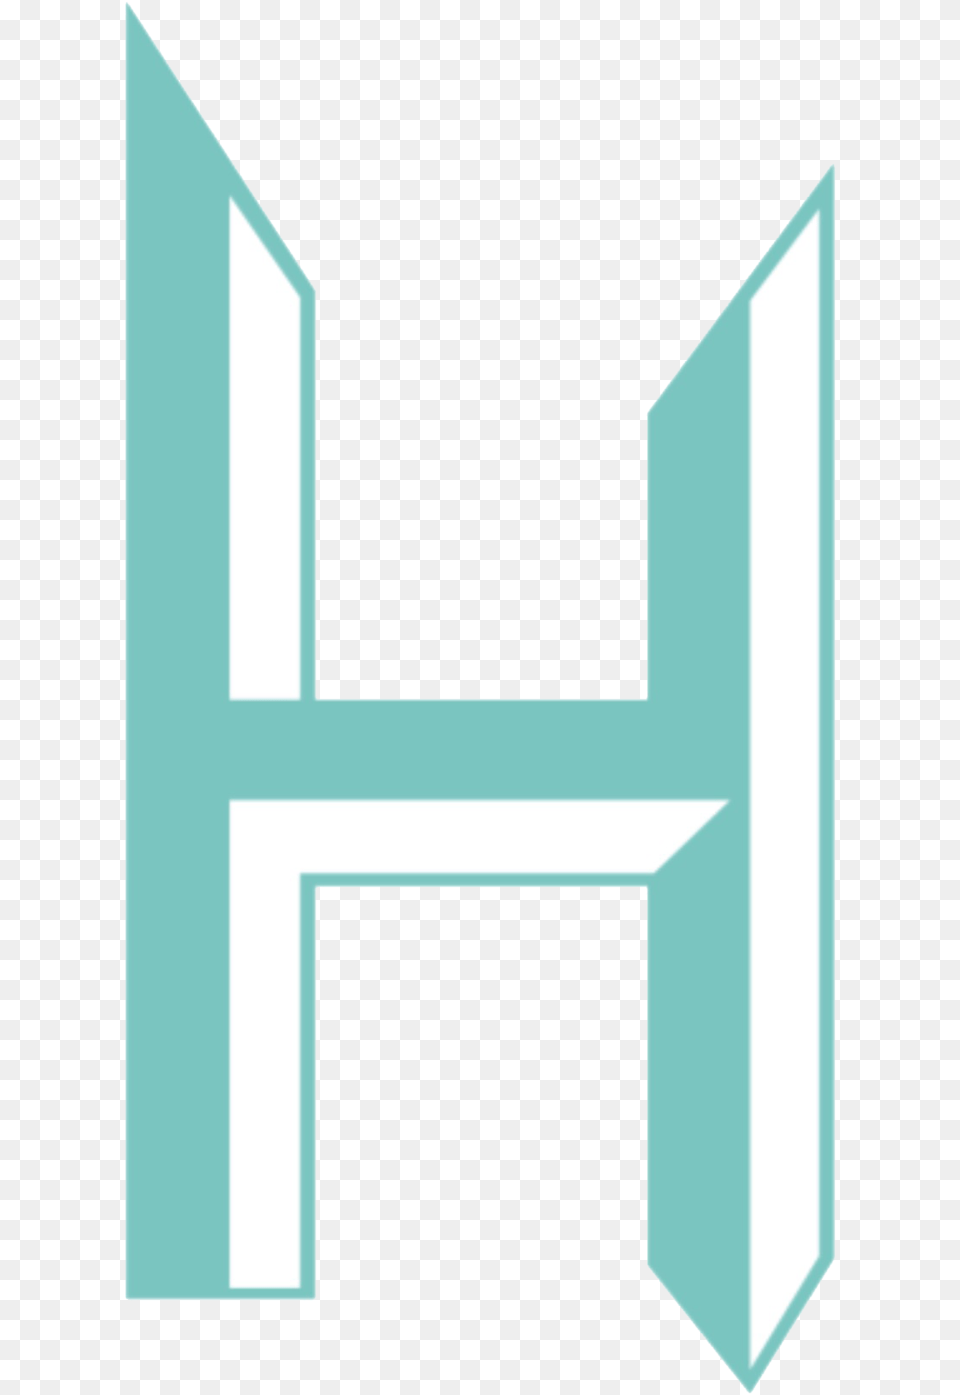 Triple H Logo Download Architecture, Accessories, Formal Wear, Tie Png Image